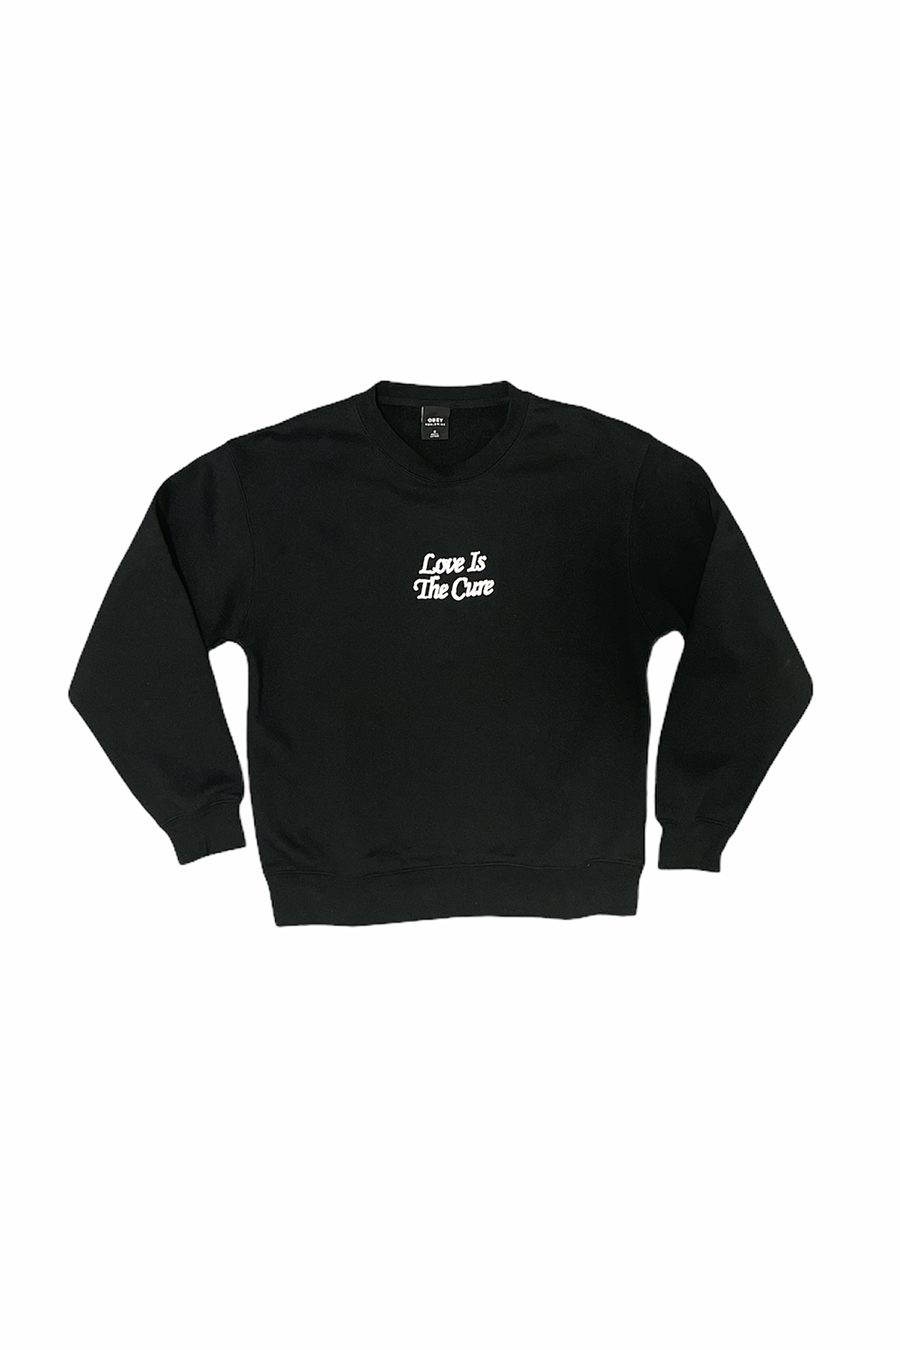 Love Is The Cure Pullover | Black - Main Image Number 1 of 2